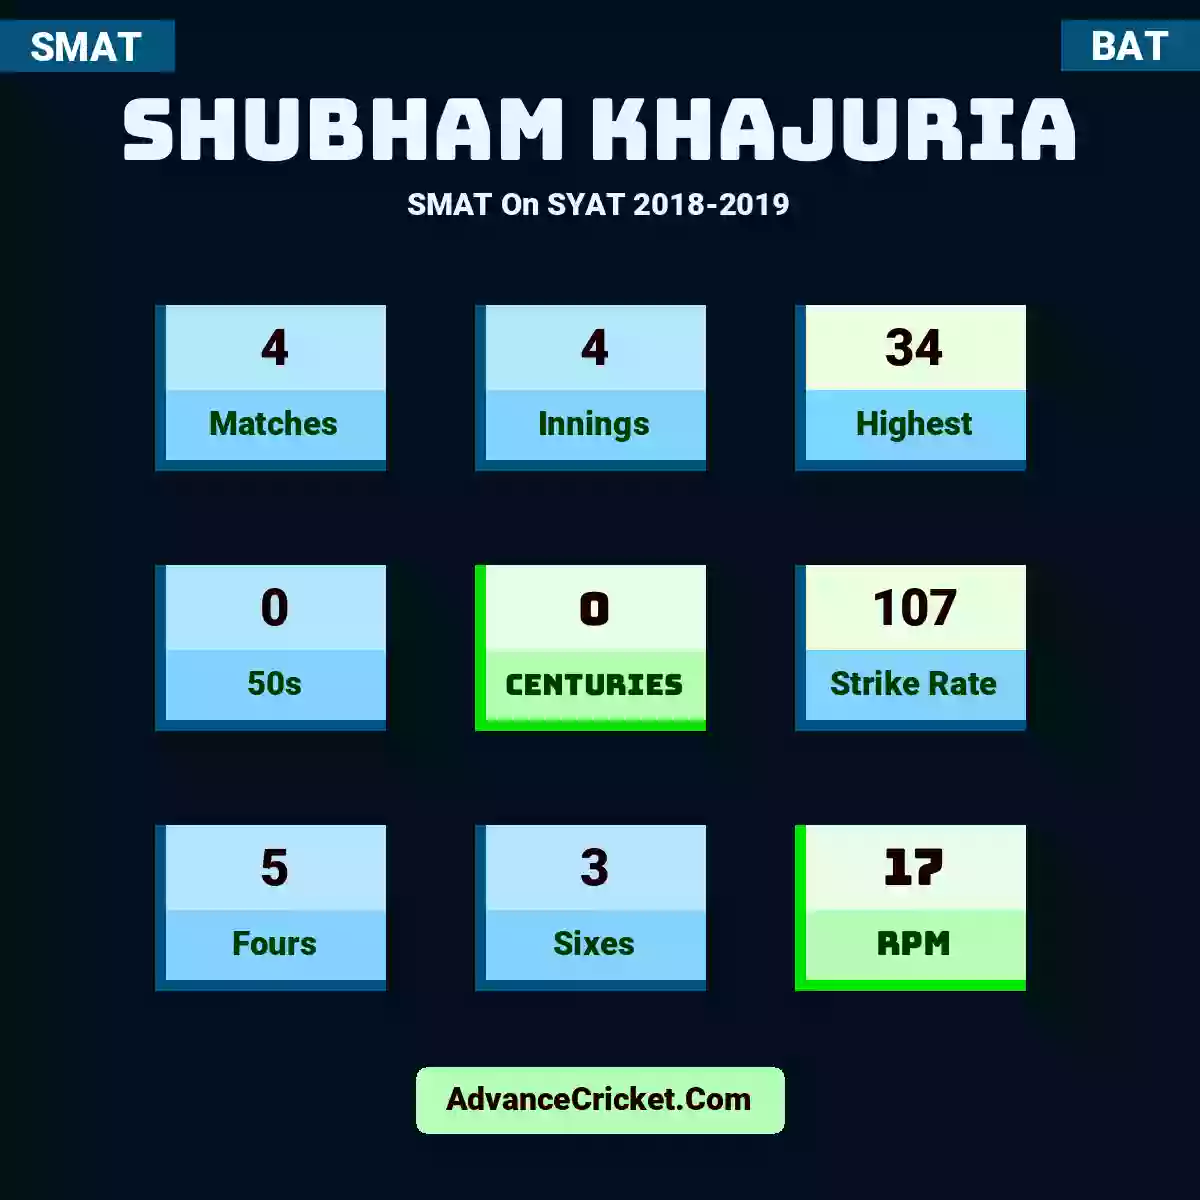 Shubham Khajuria SMAT  On SYAT 2018-2019, Shubham Khajuria played 4 matches, scored 34 runs as highest, 0 half-centuries, and 0 centuries, with a strike rate of 107. S.Khajuria hit 5 fours and 3 sixes, with an RPM of 17.